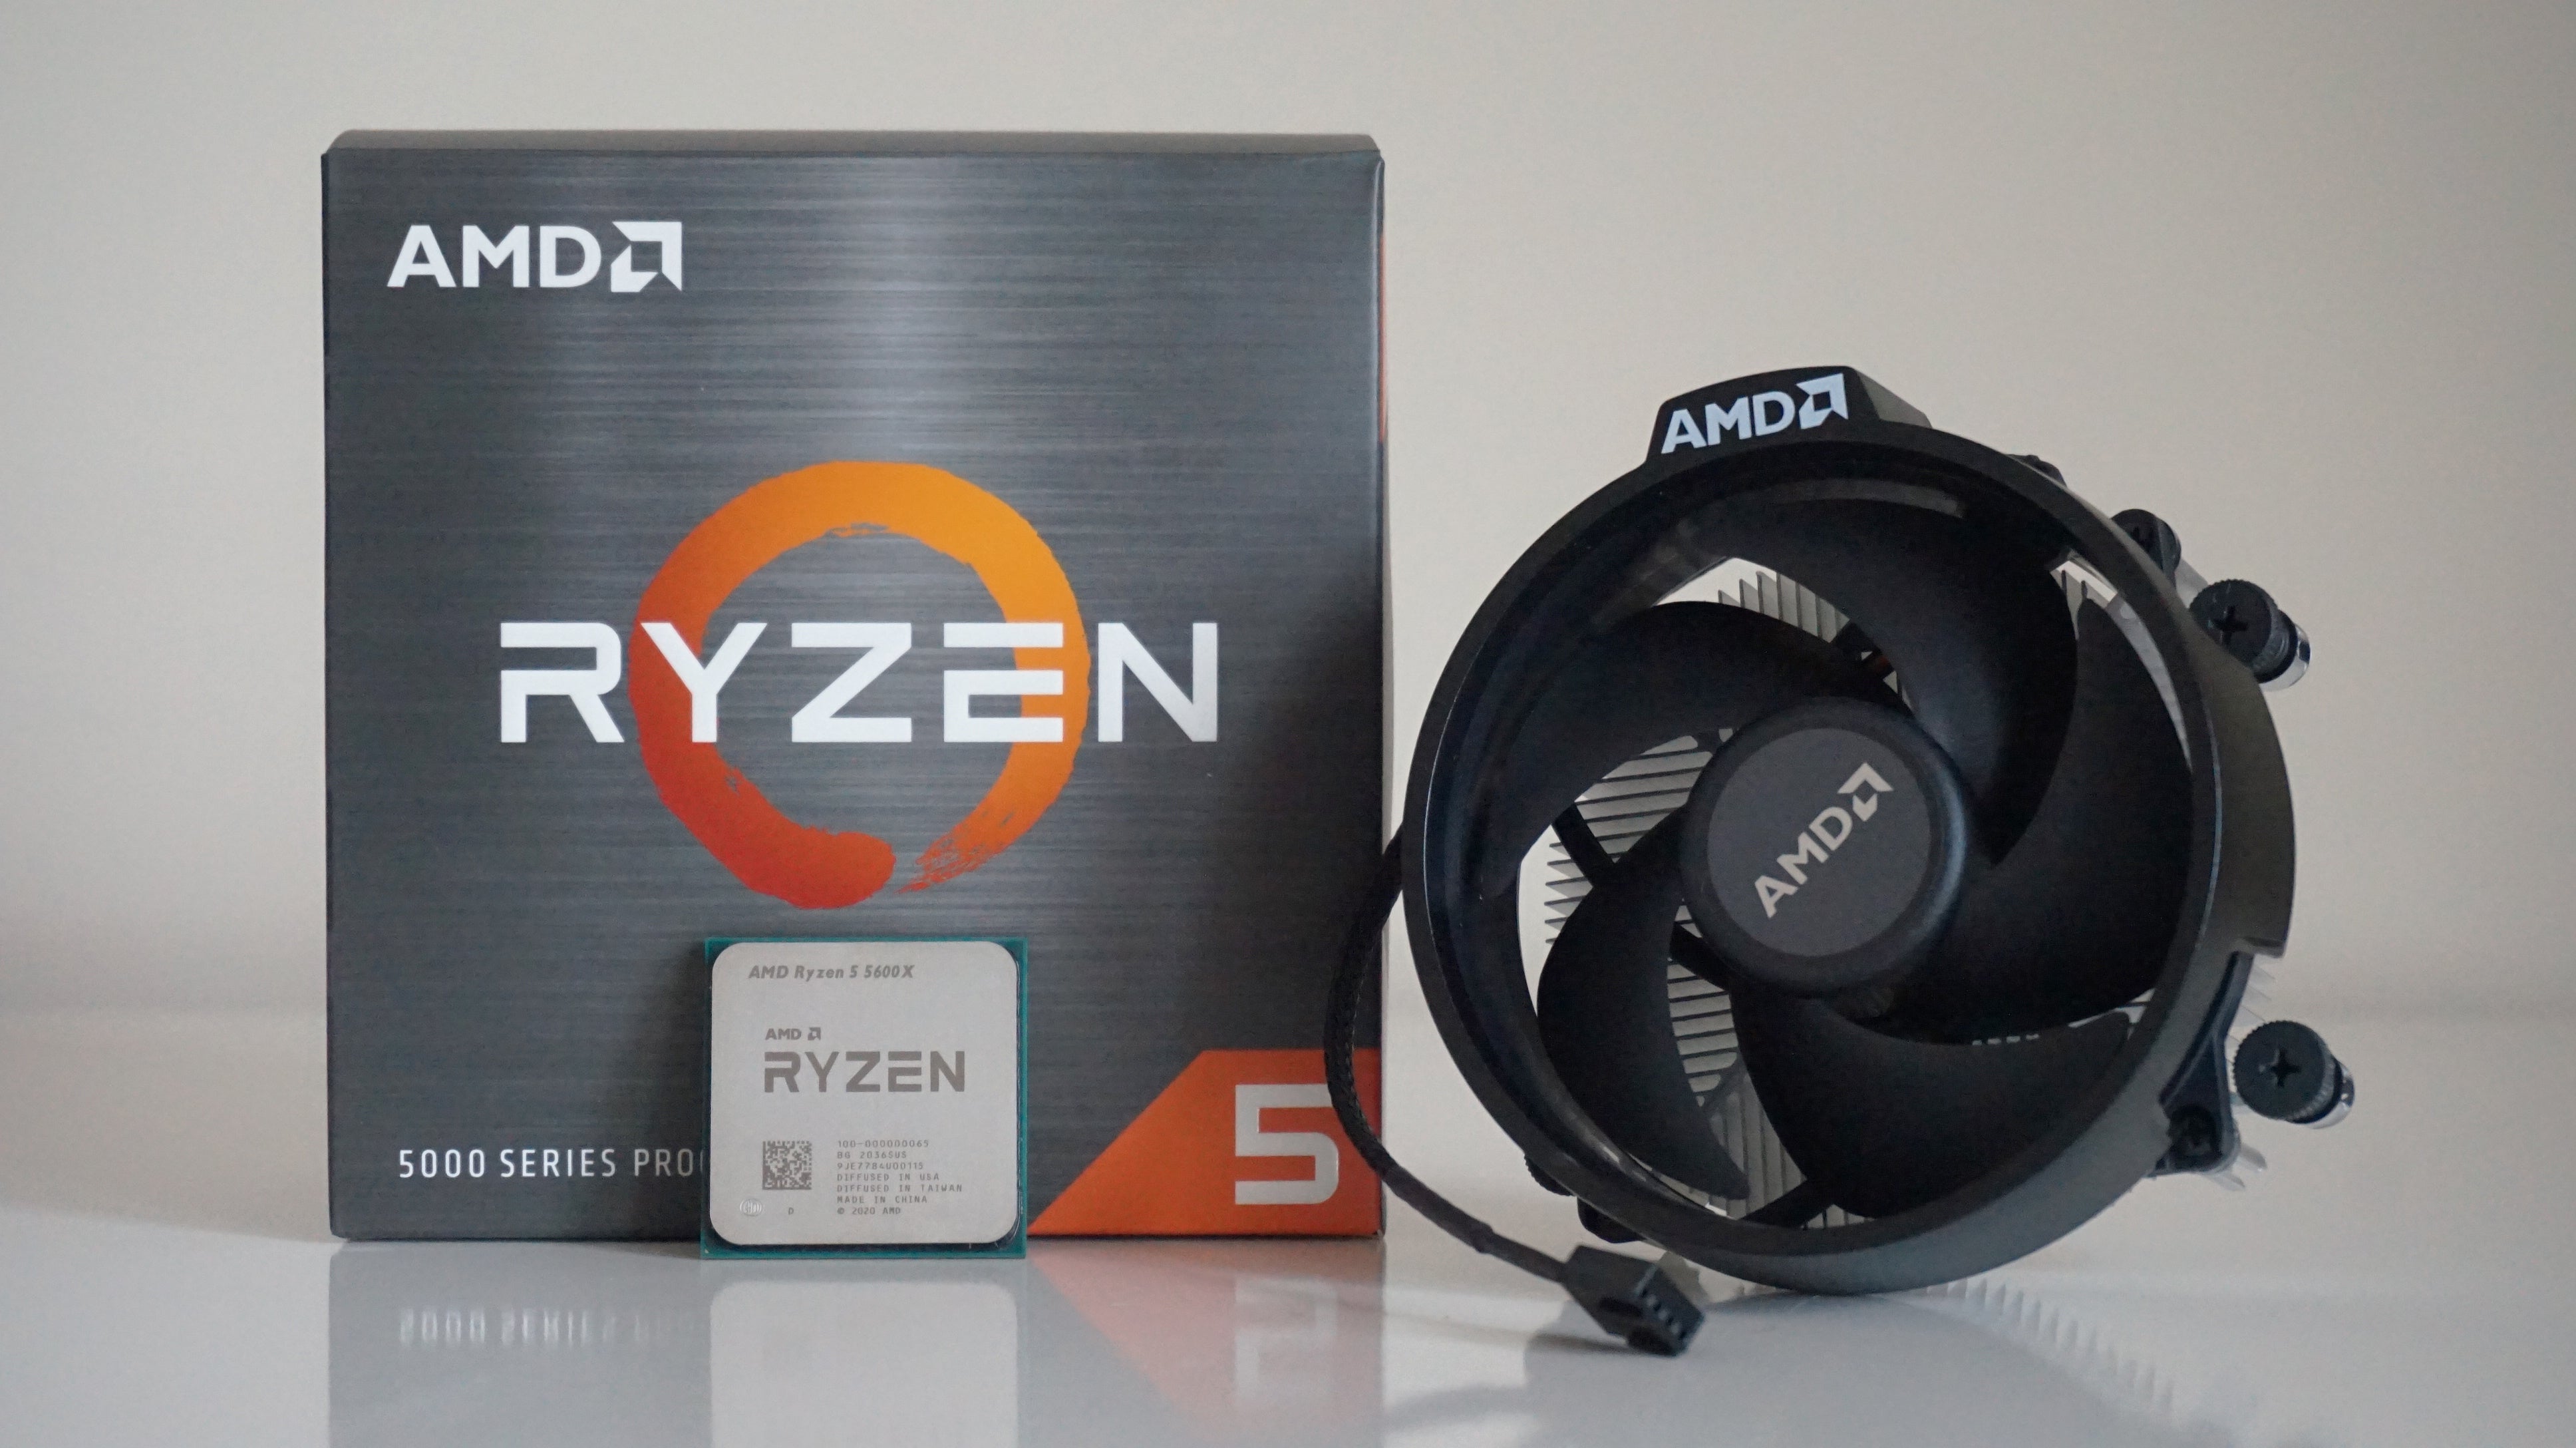 Image for AMD's Ryzen 5 5600X gaming CPU is down to £185 in the UK